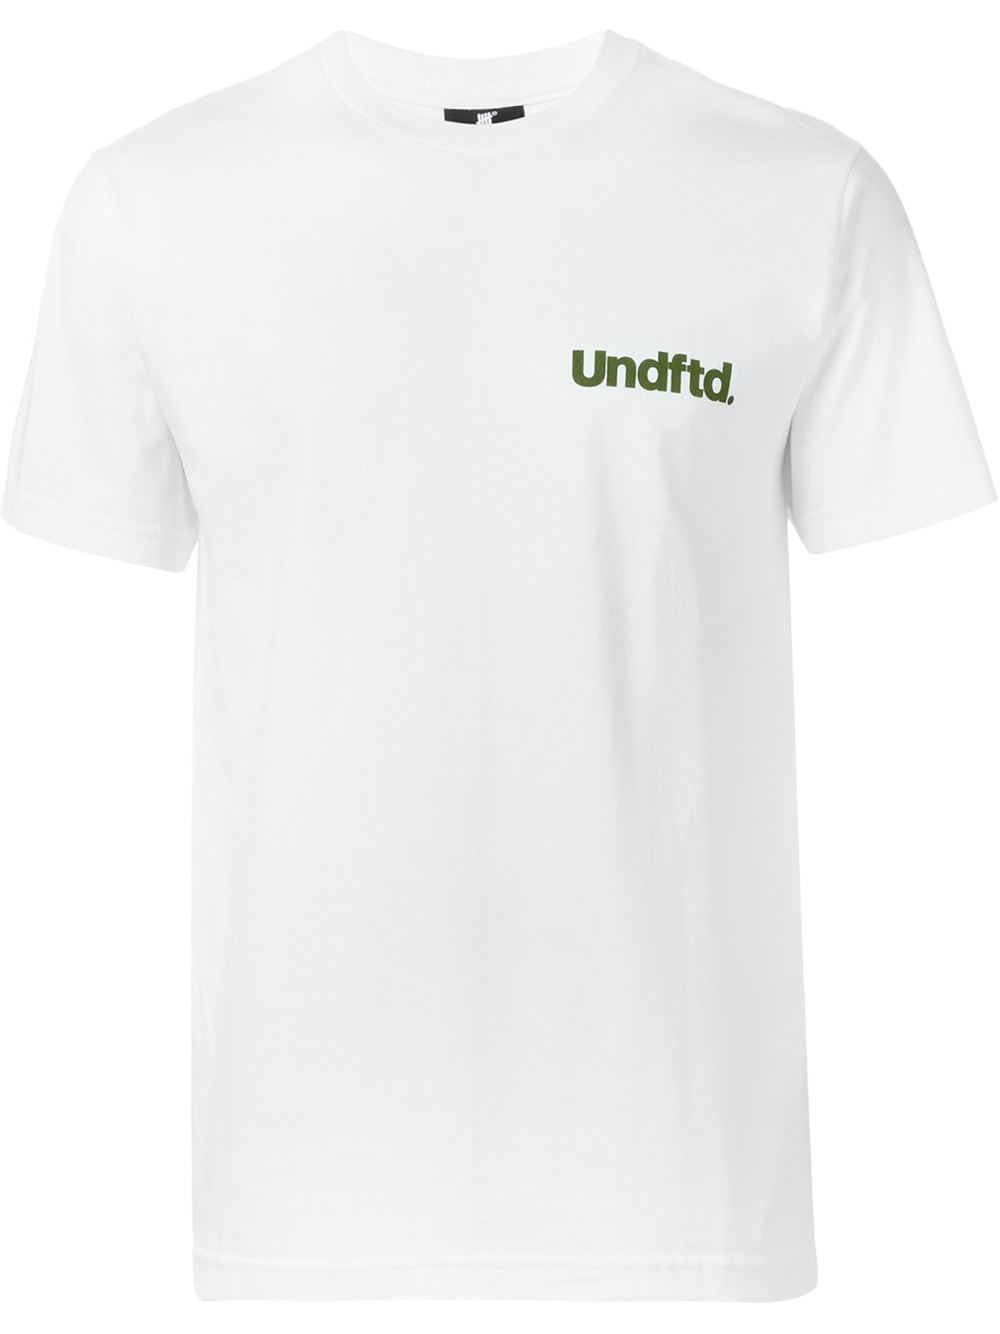 Lyst - Undefeated Logo Print T-shirt in White for Men